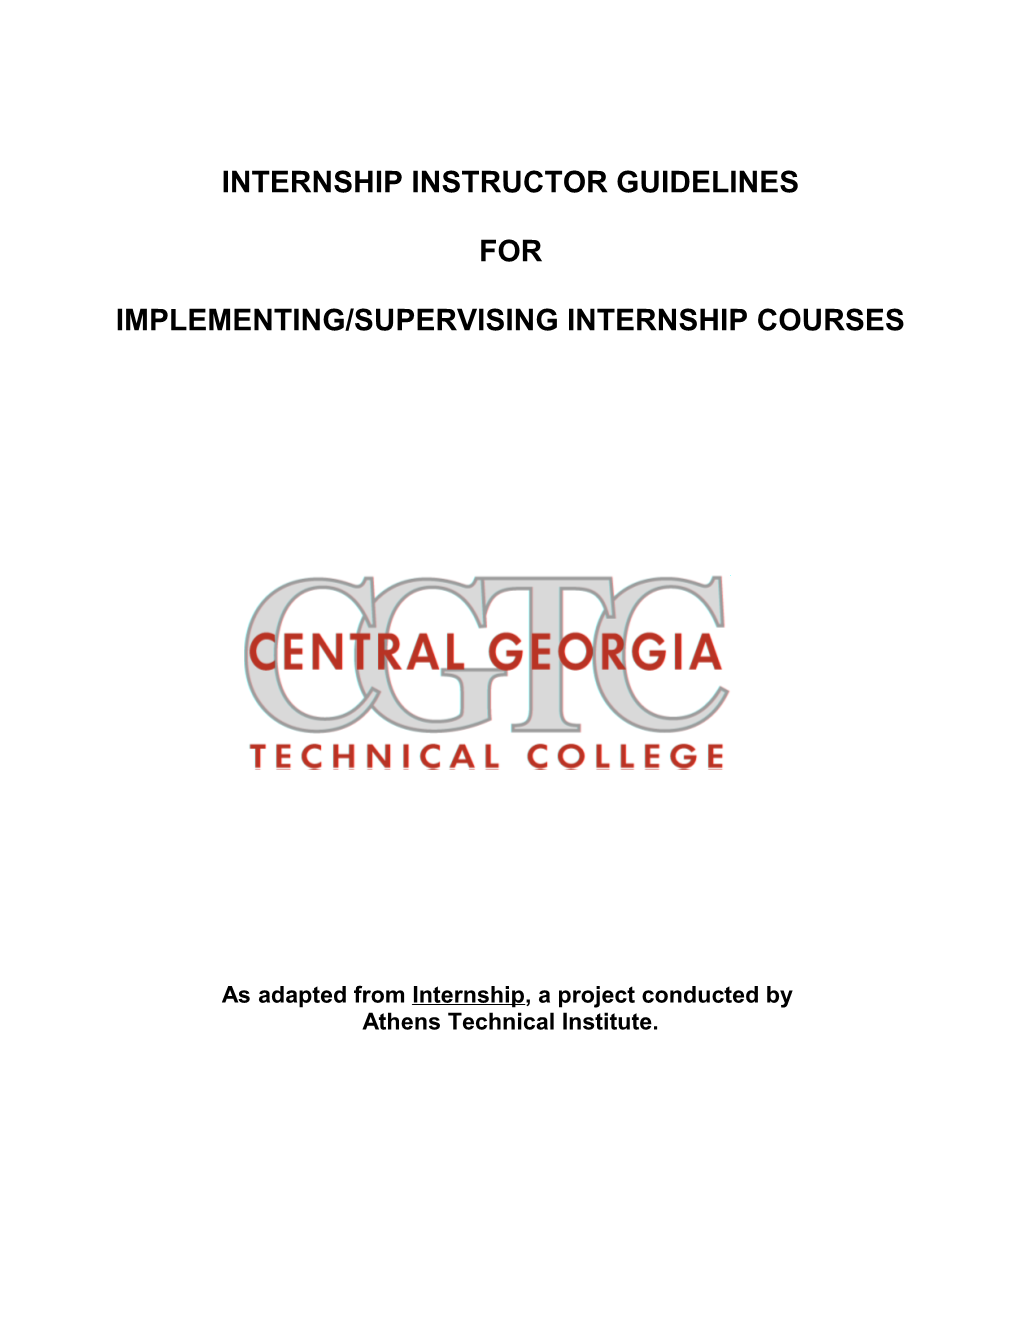 Implementing/Supervising Internship Courses